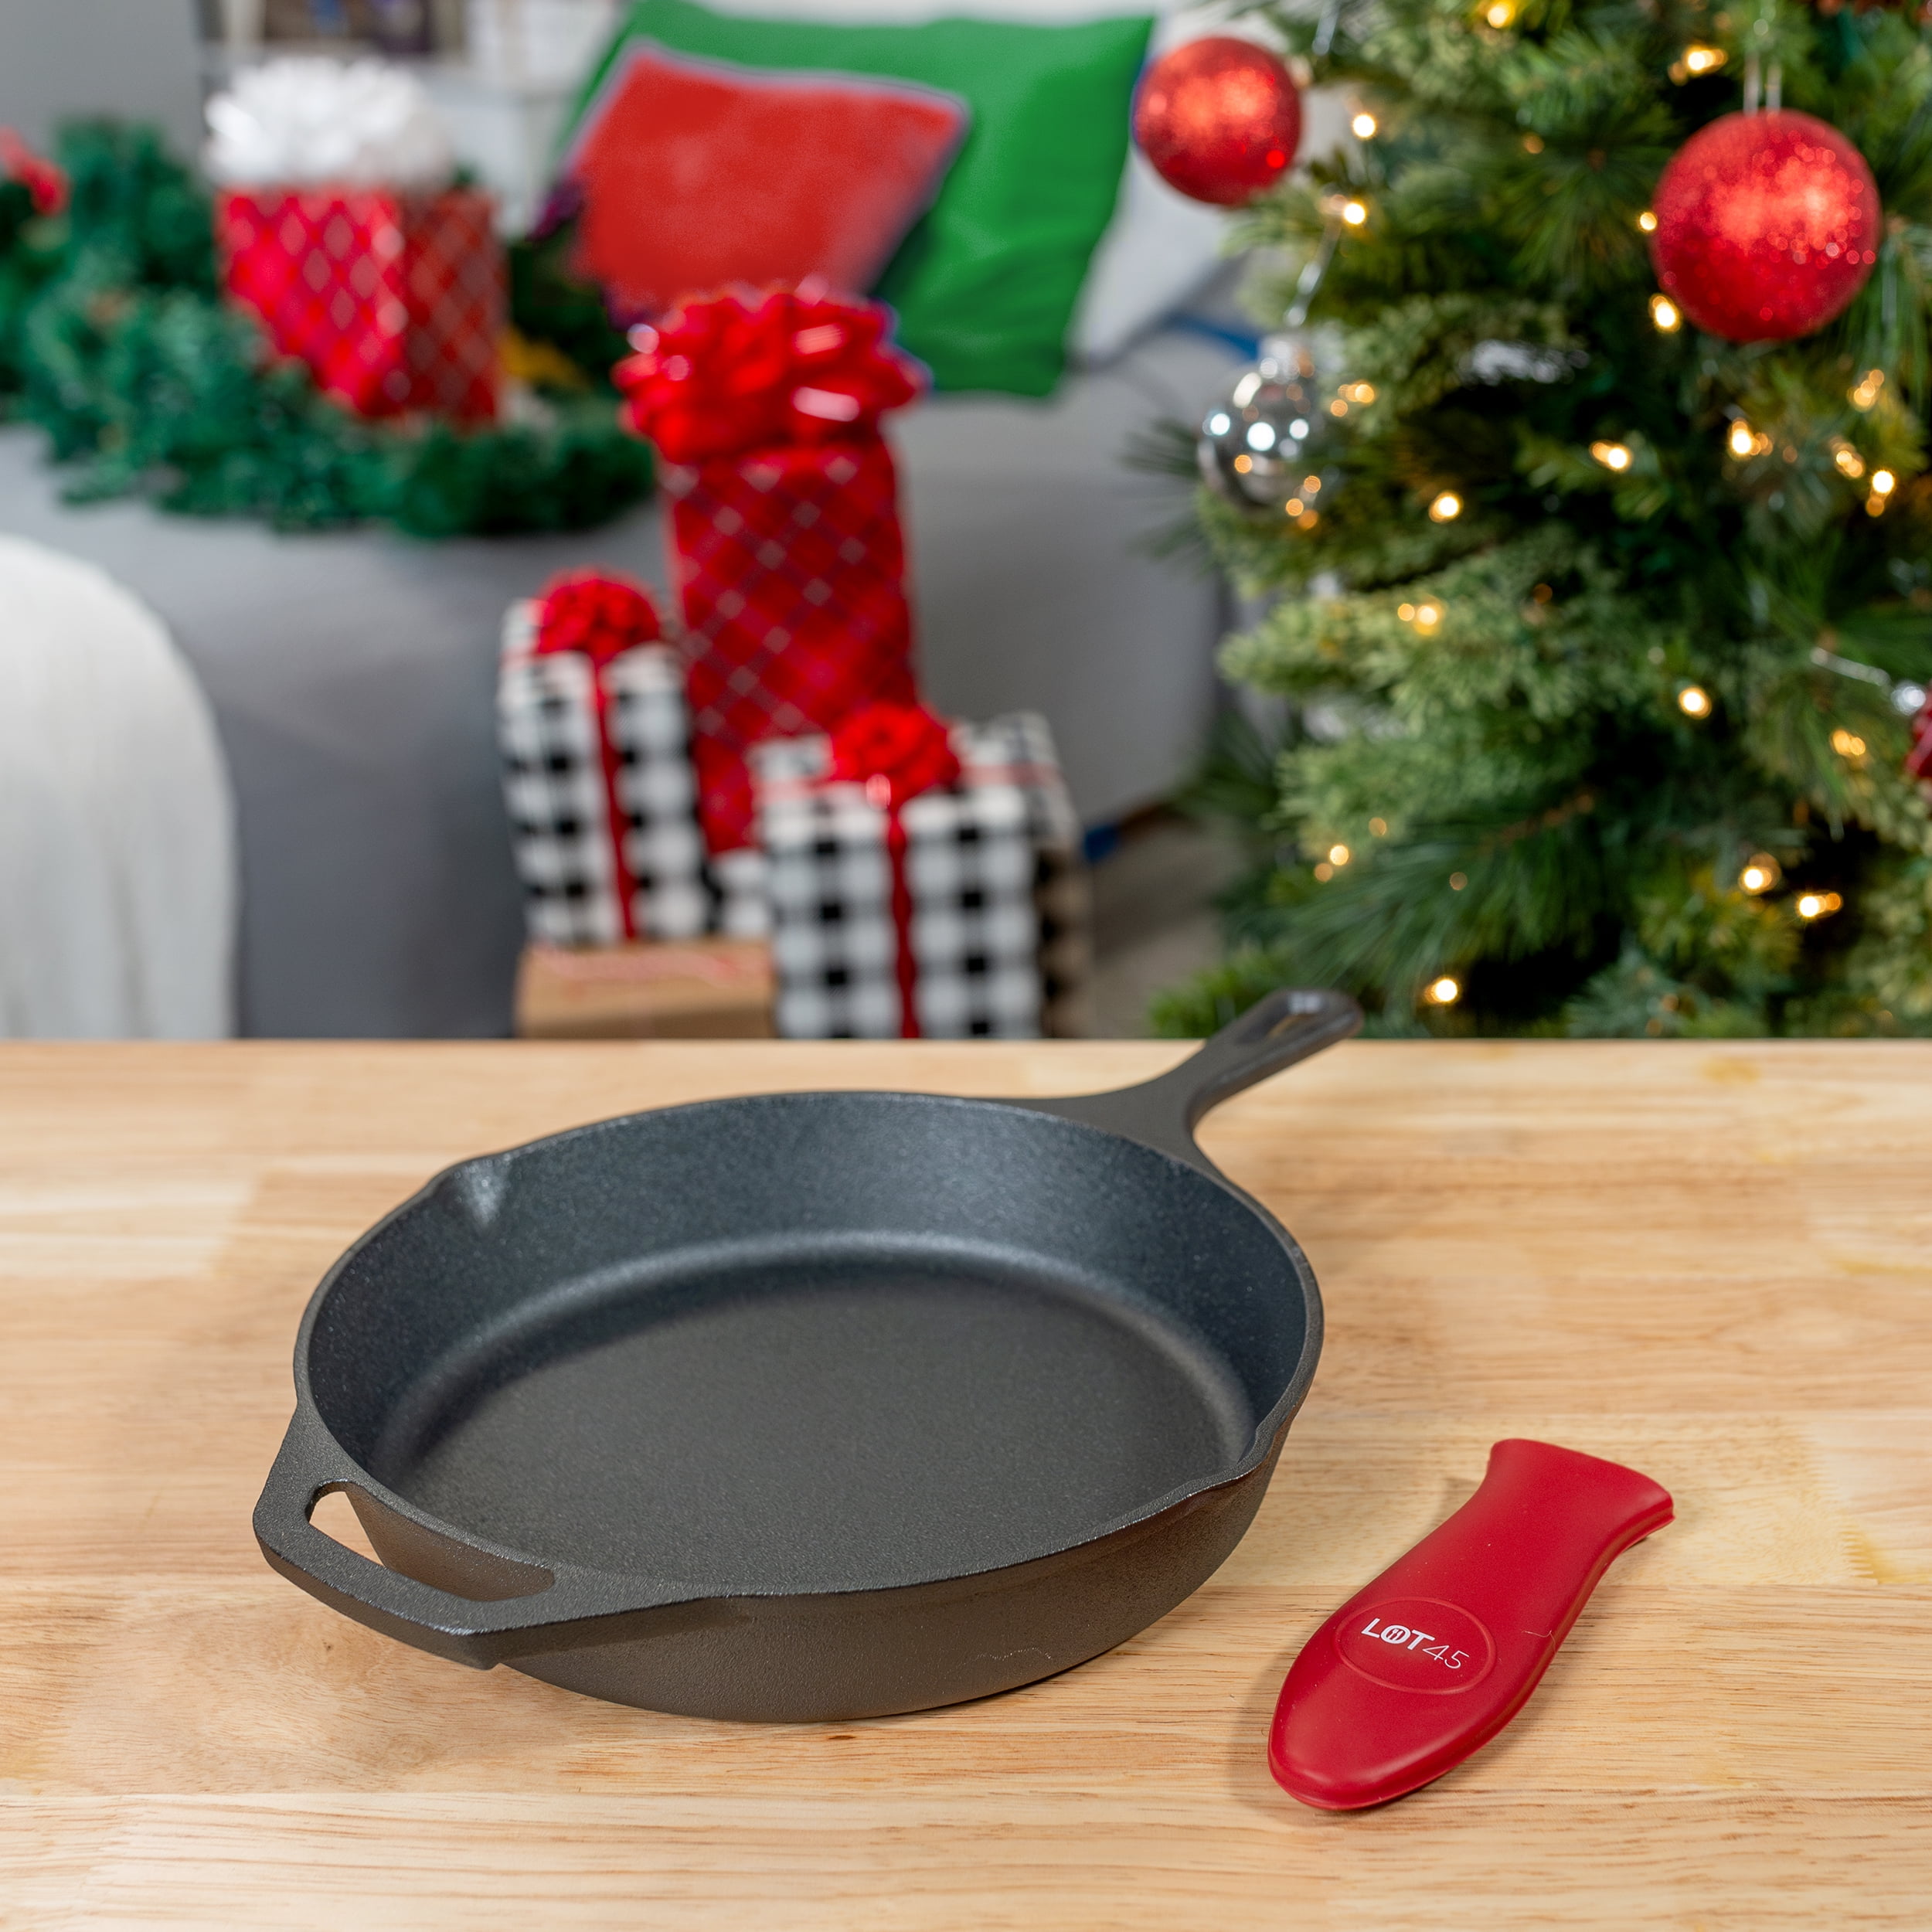 Backcountry Cast Iron Skillet (10 inch Medium Frying Pan + Cloth Handle Mitt, Pre-Seasoned for Non-Stick Like Surface, Cookware Oven/Broiler/Grill